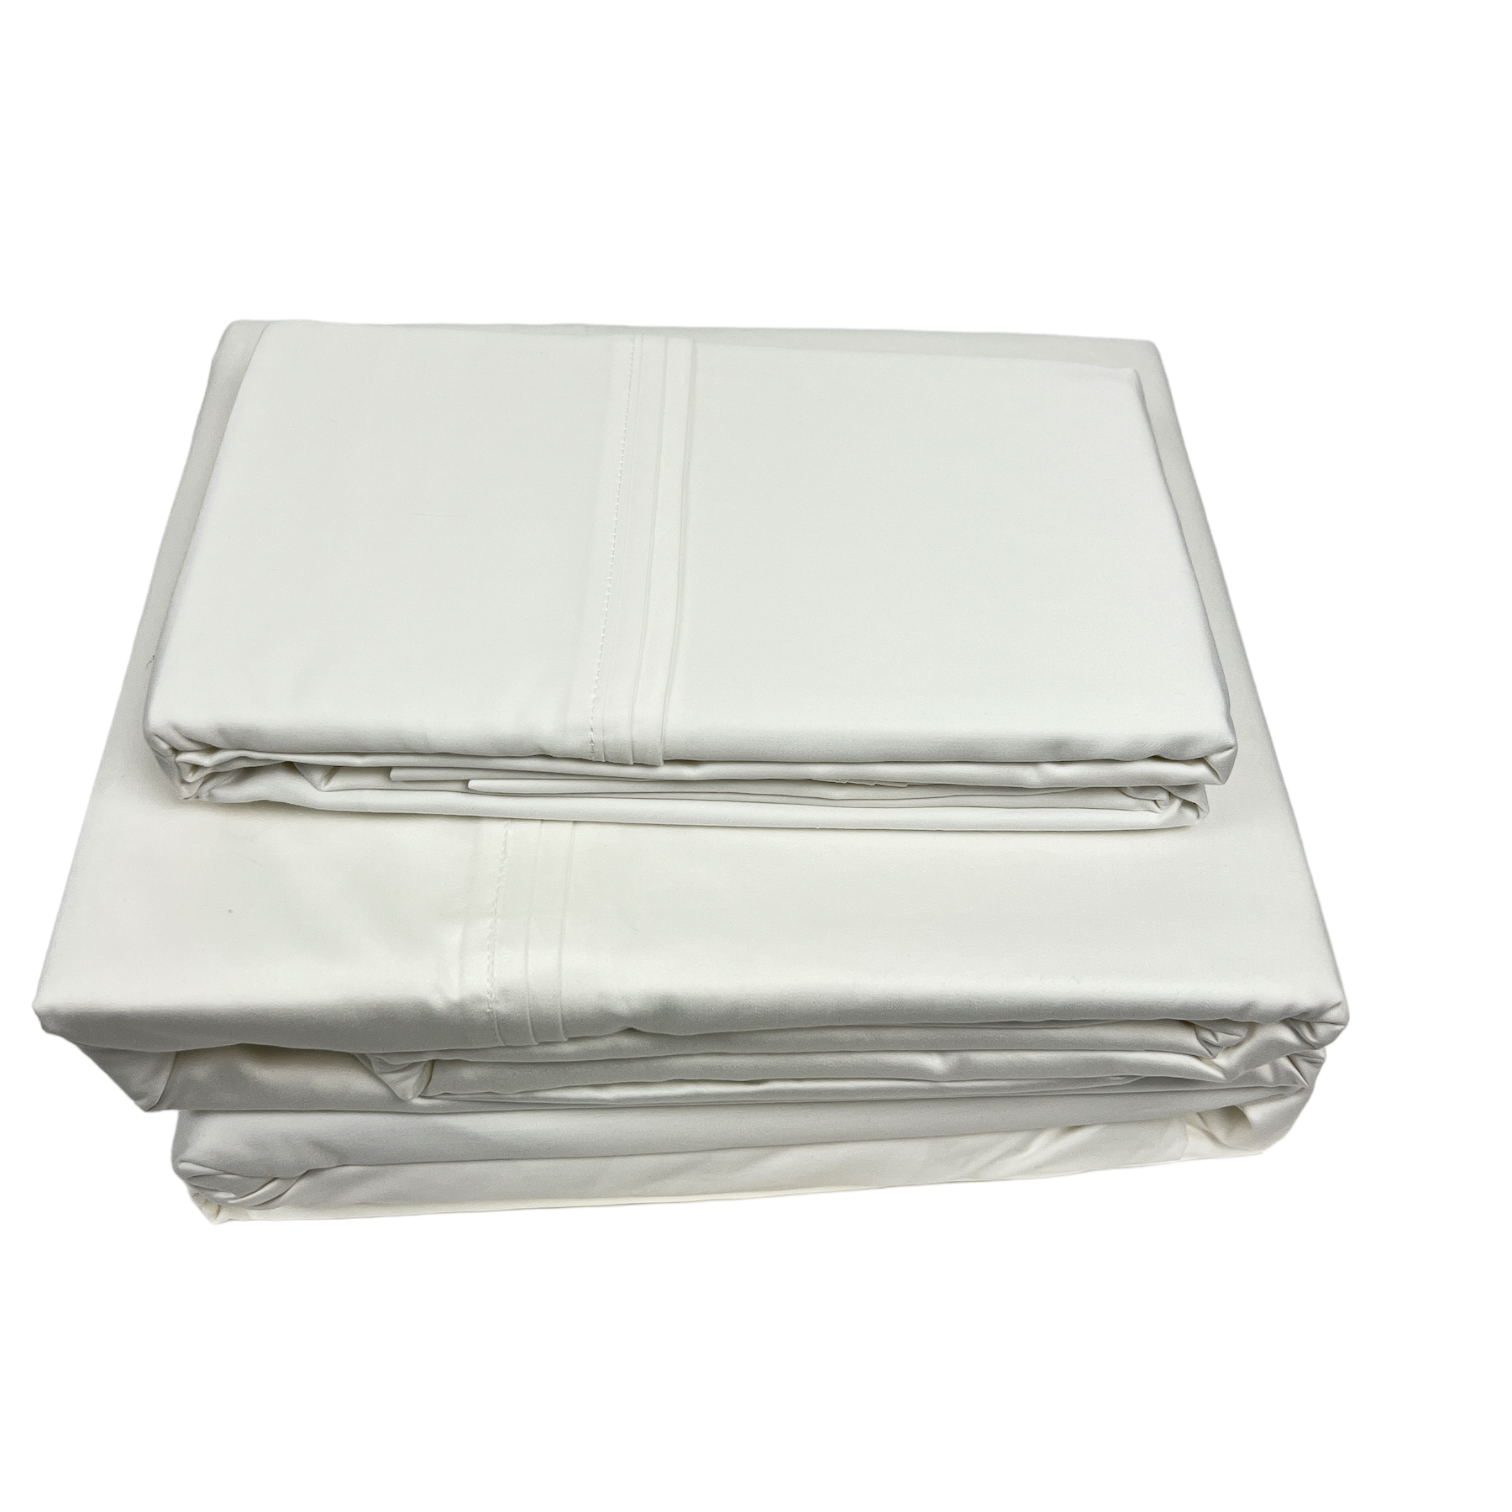 Effortless® Bedding Standard Size Fitted Bottom Sheet With Anchor Elastic  Bands White 100% Certified Giza Egyptian Cotton Extra-Long Staple (ELS) 500